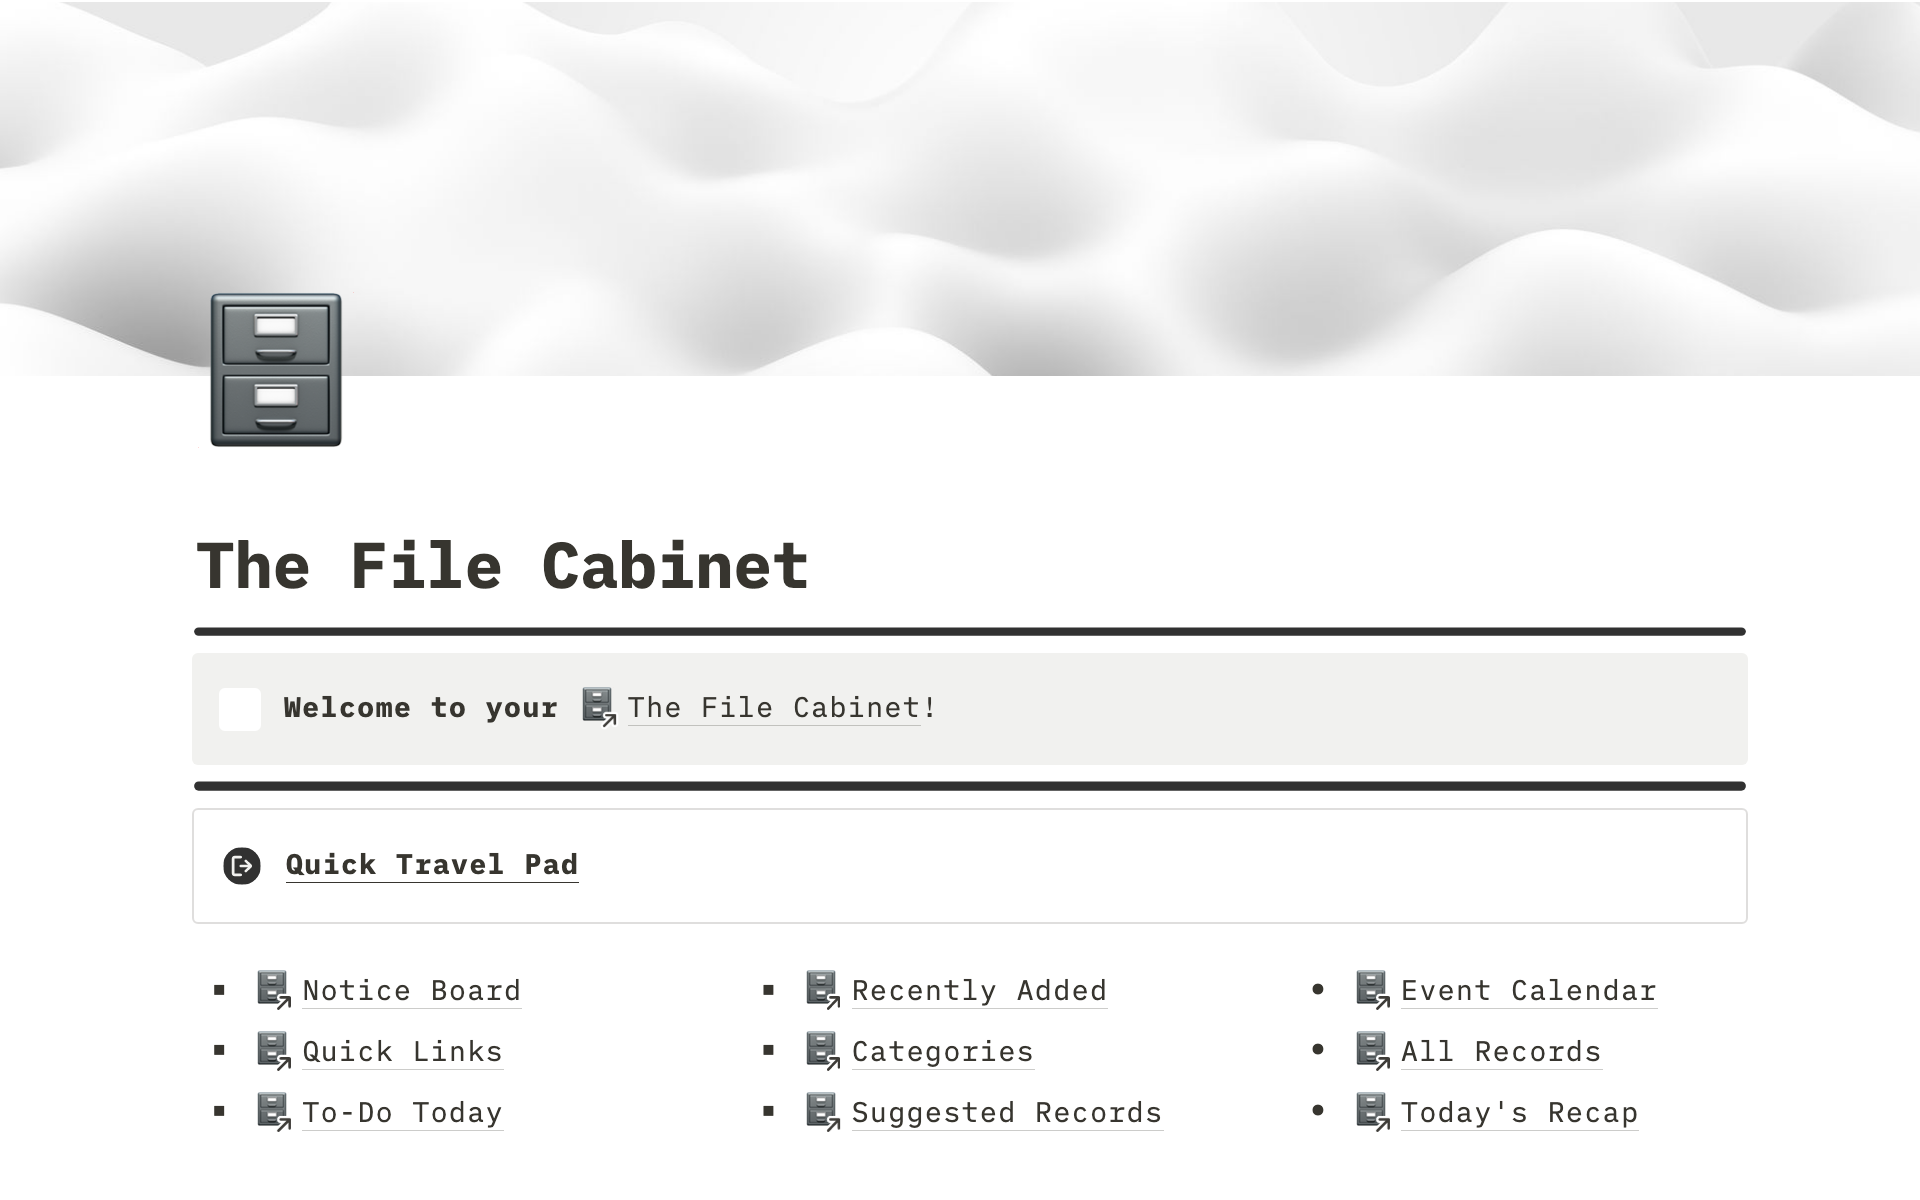 The File Cabinet organizes users' files making it easy for them to find what they need, when they need it and provides